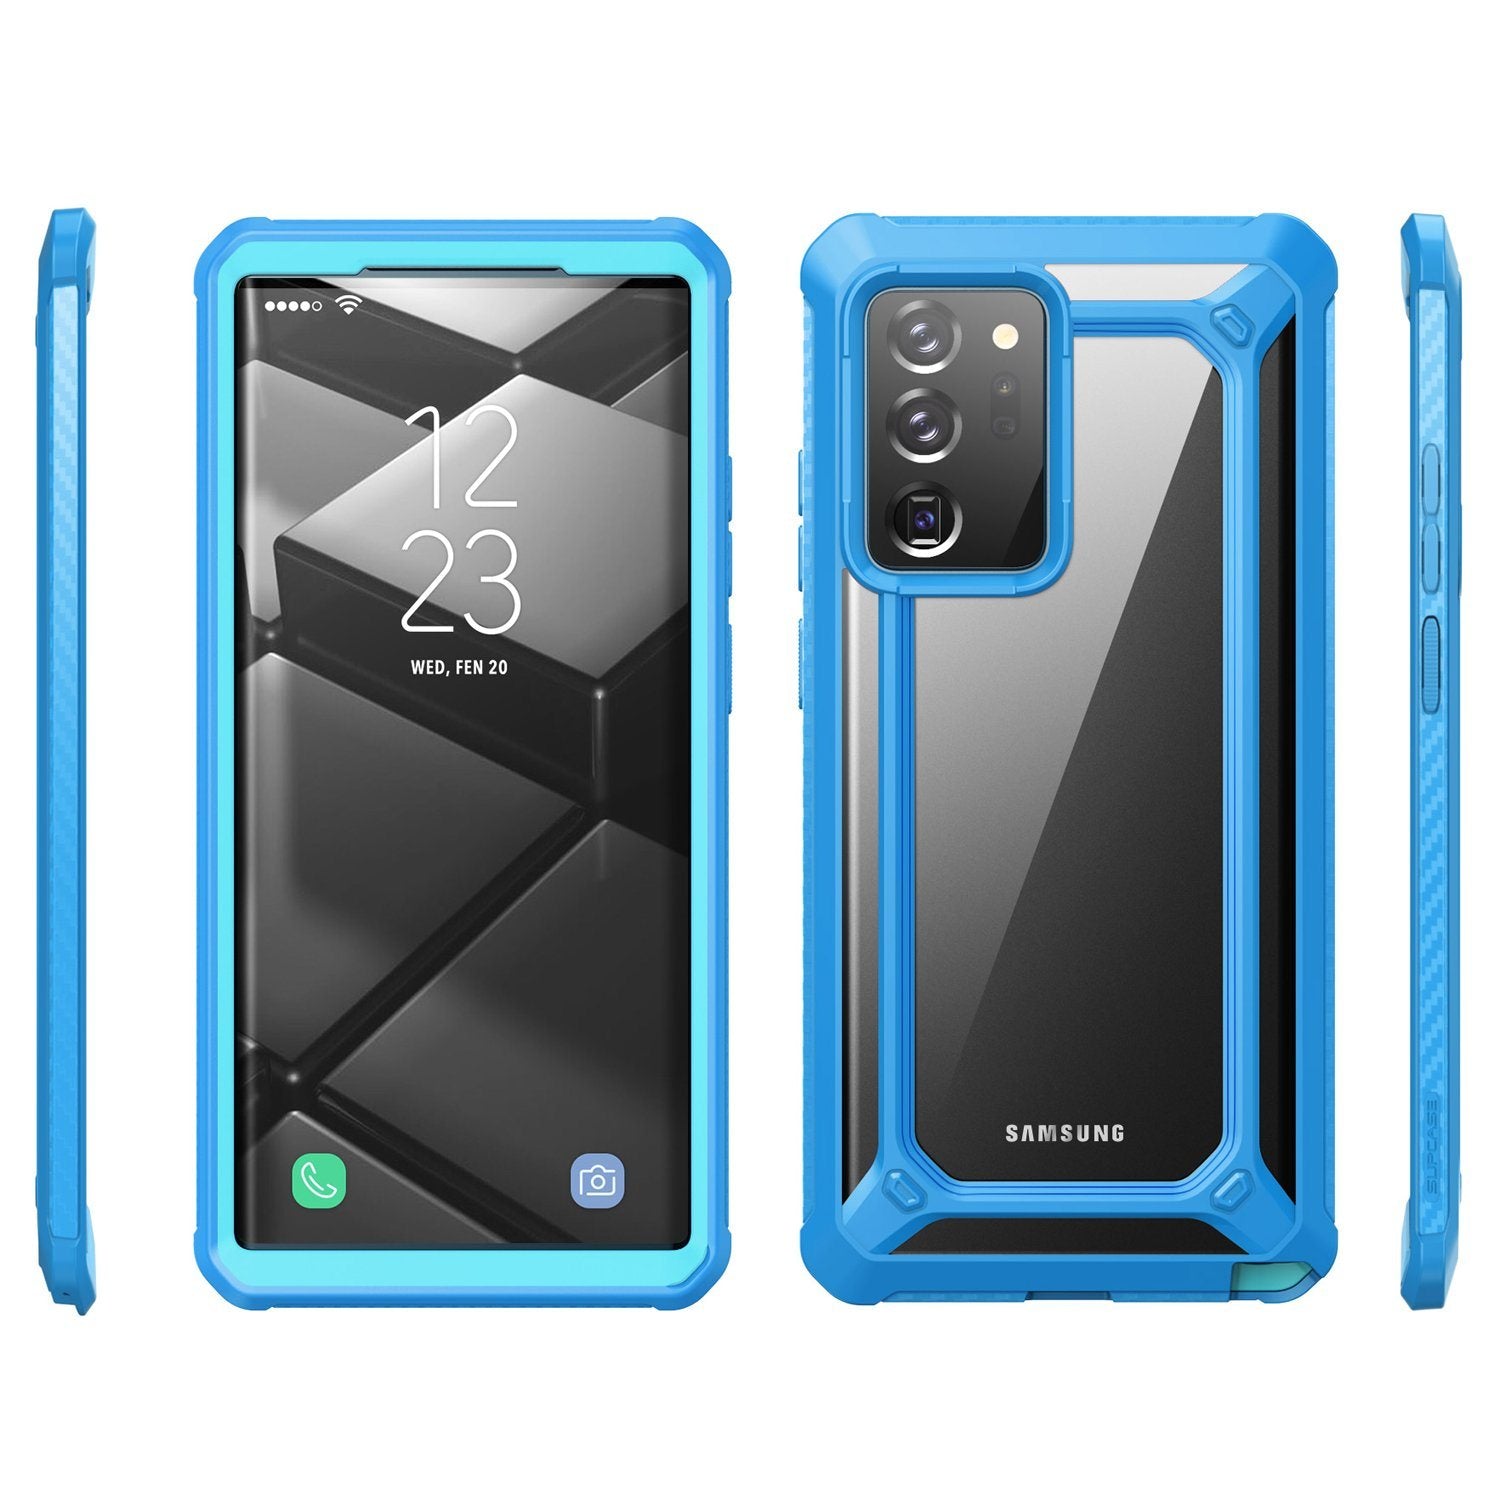 Supcase UB Exo Series for Samsung Galaxy Note 20 Ultra(Without Screen Protector), Blue Default supcase 